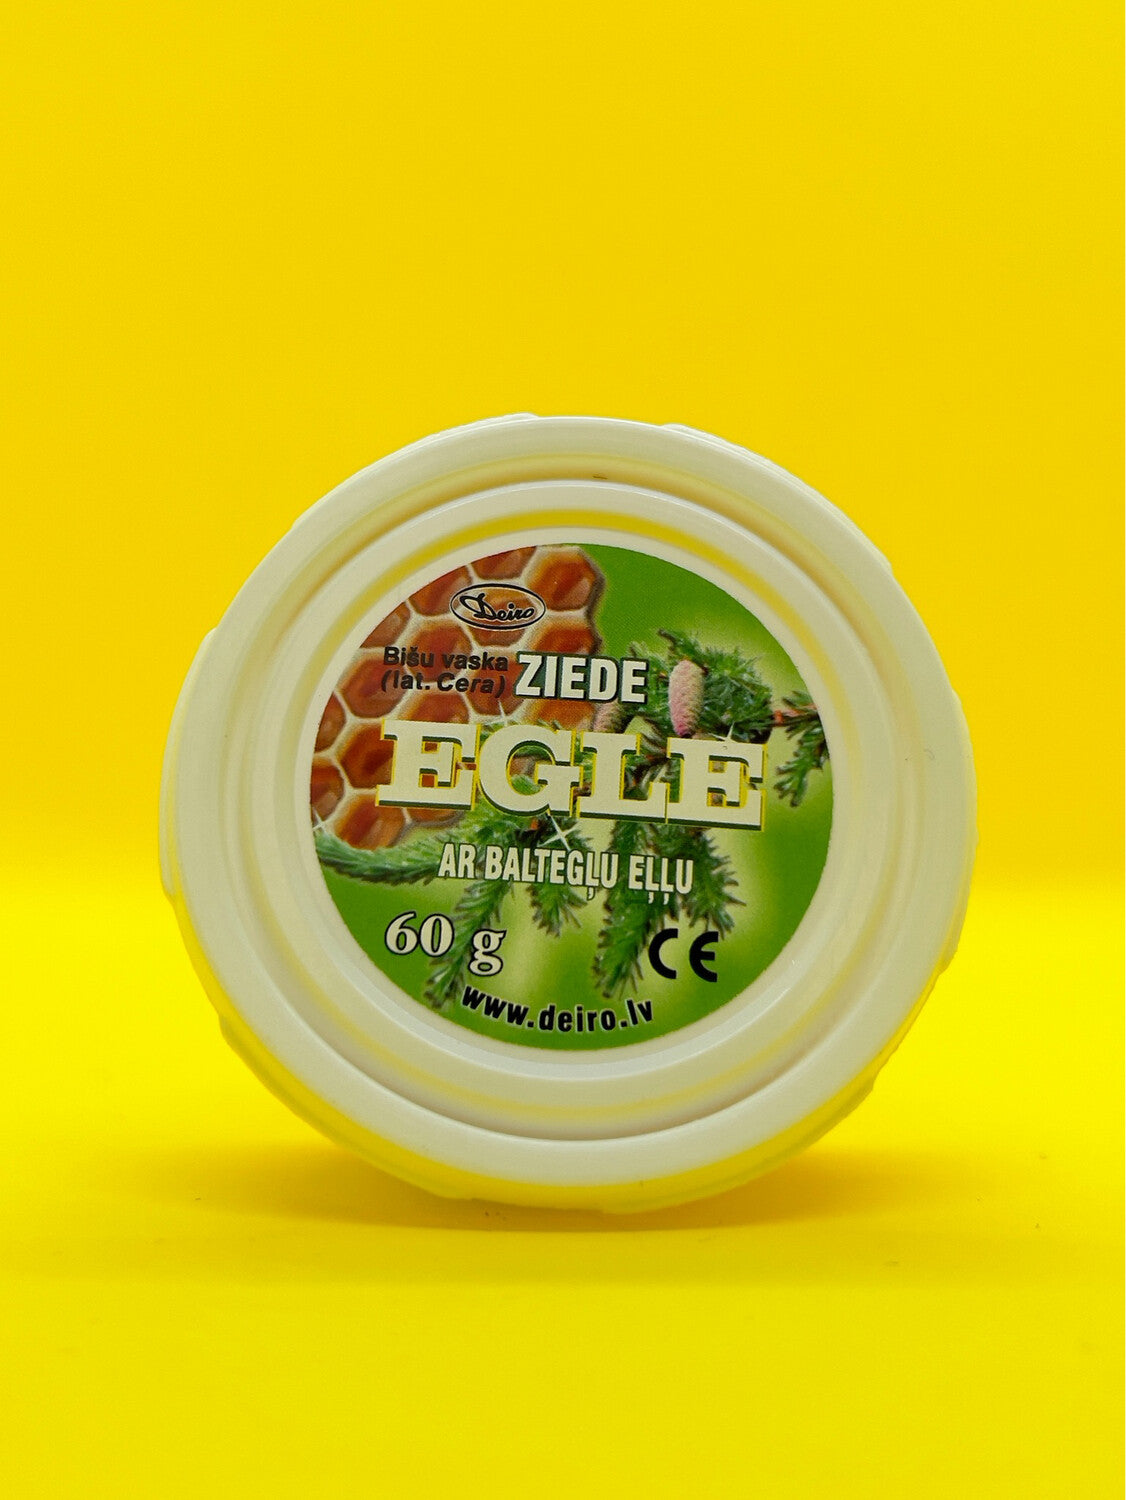 Beeswax ointment "Spruce" with white fir oil